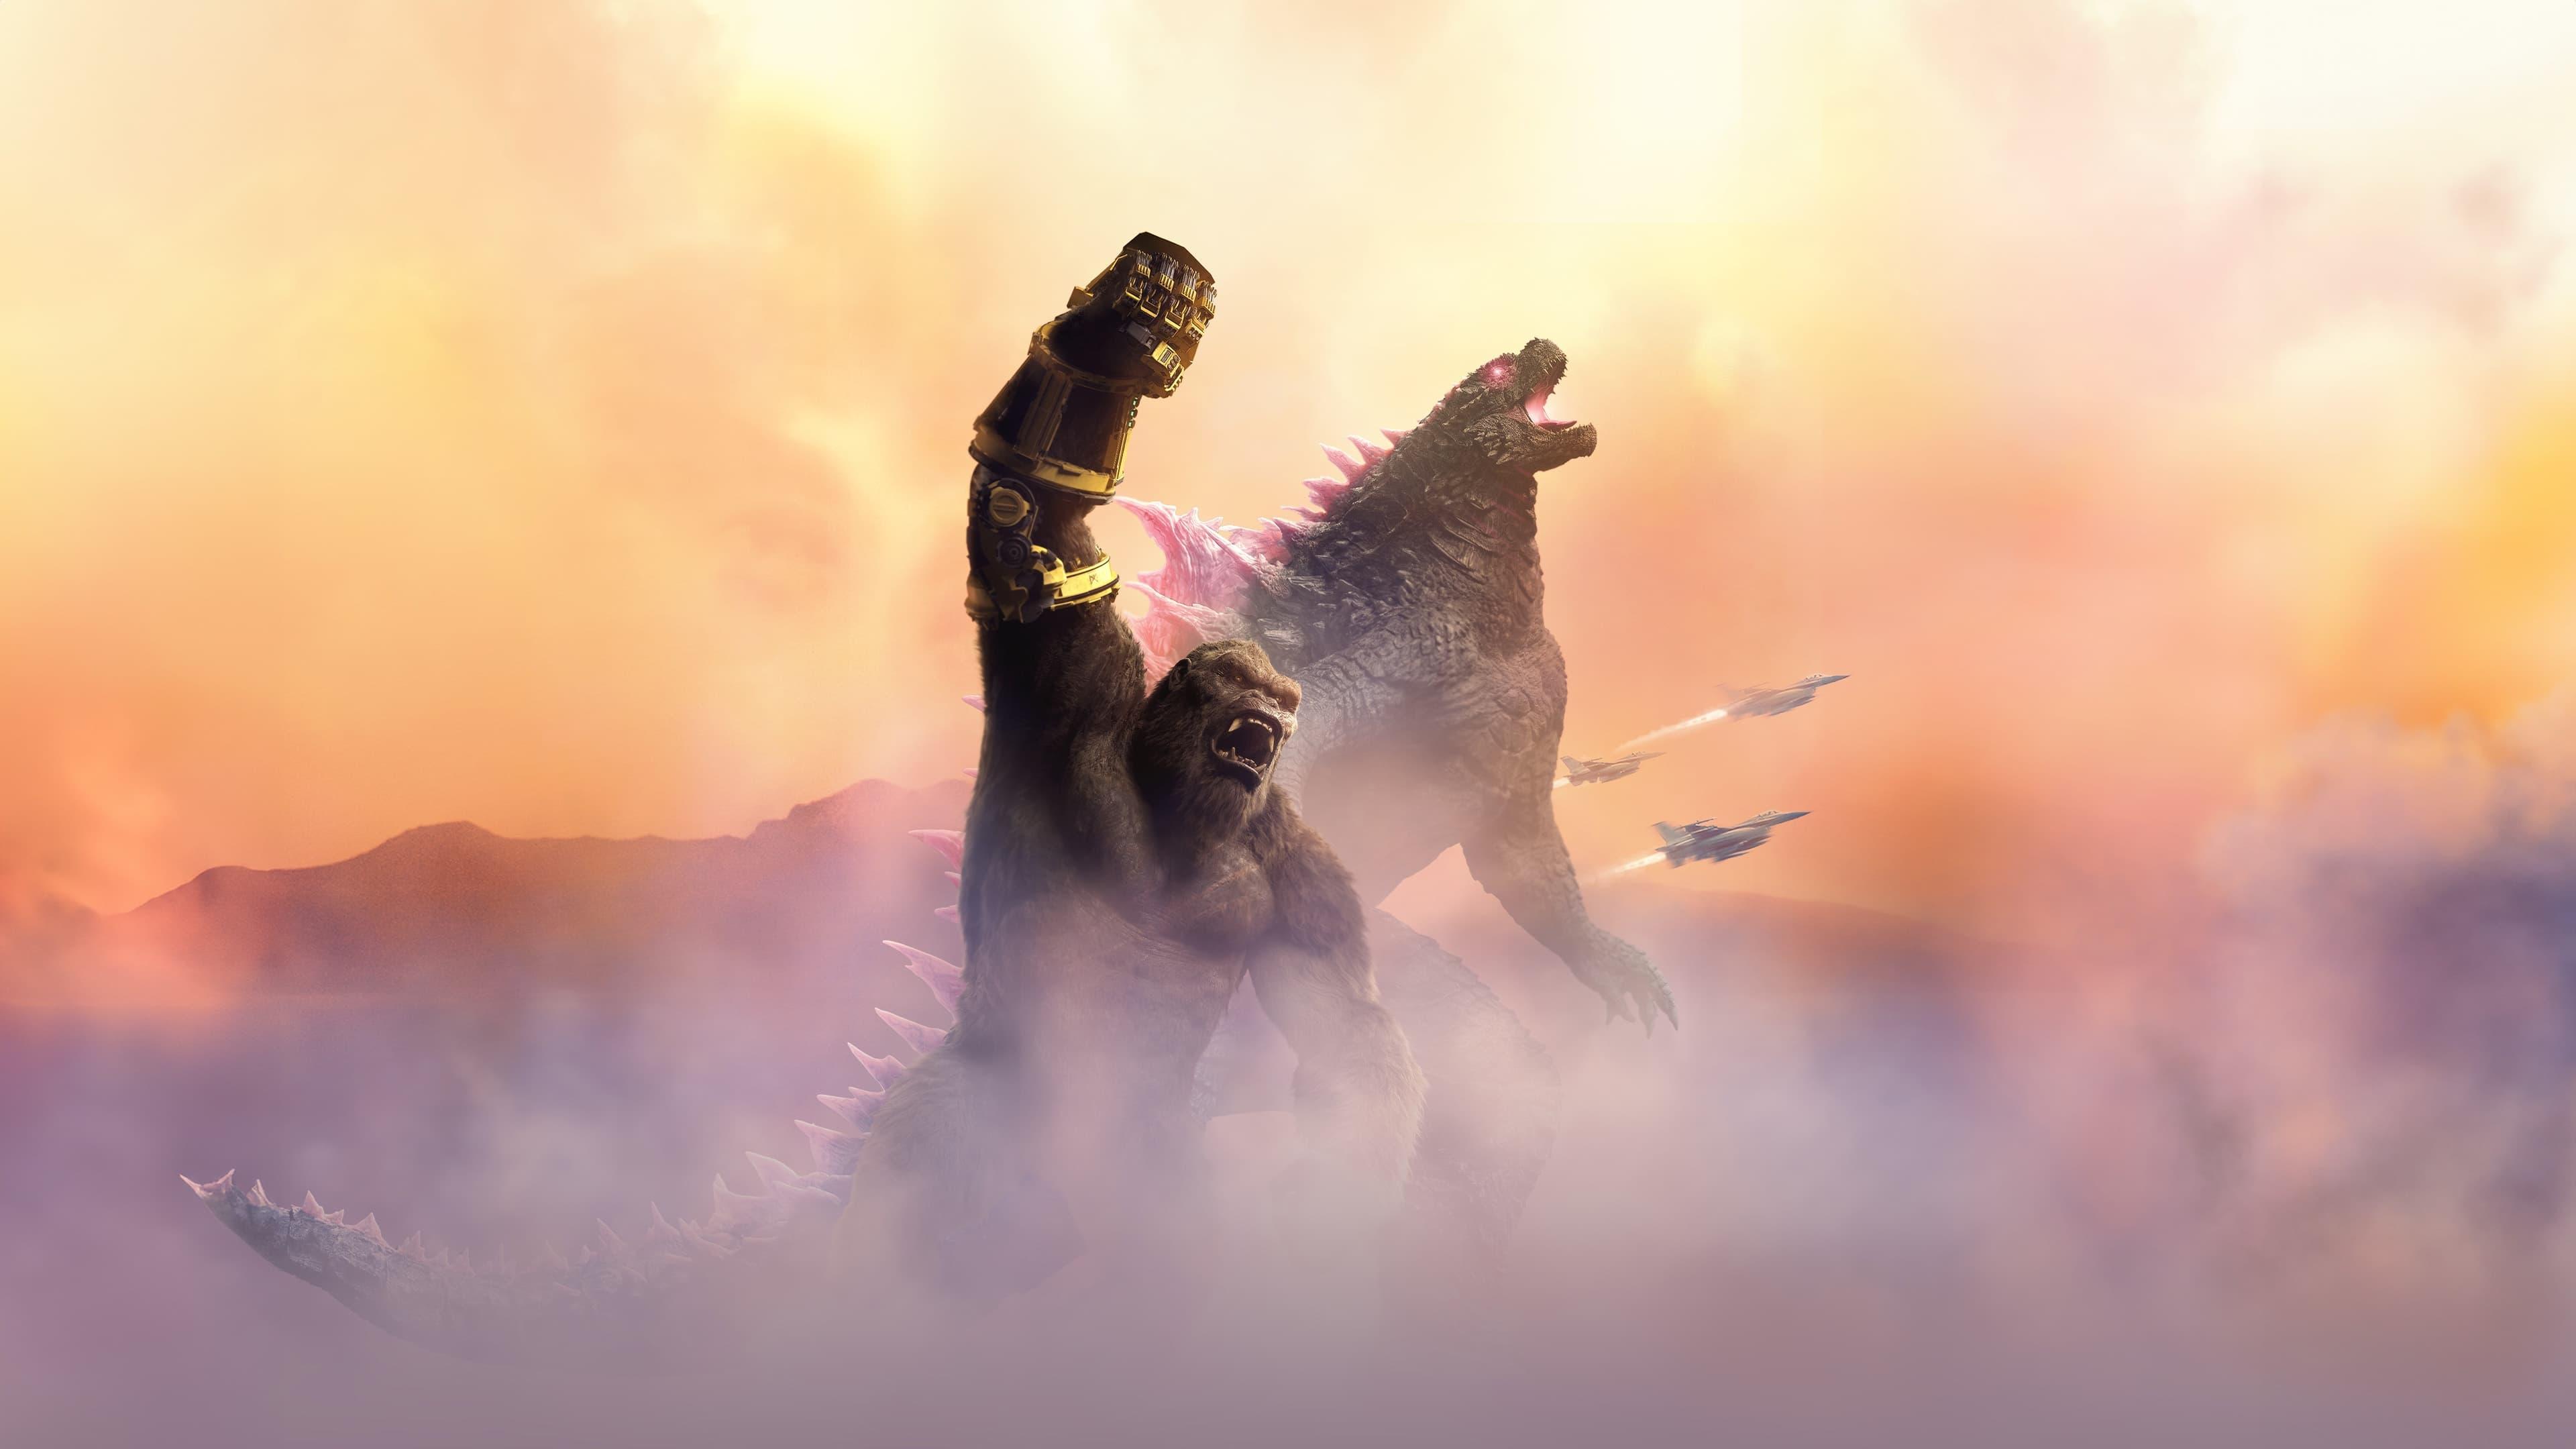 movie poster for Godzilla x Kong: The New Empire